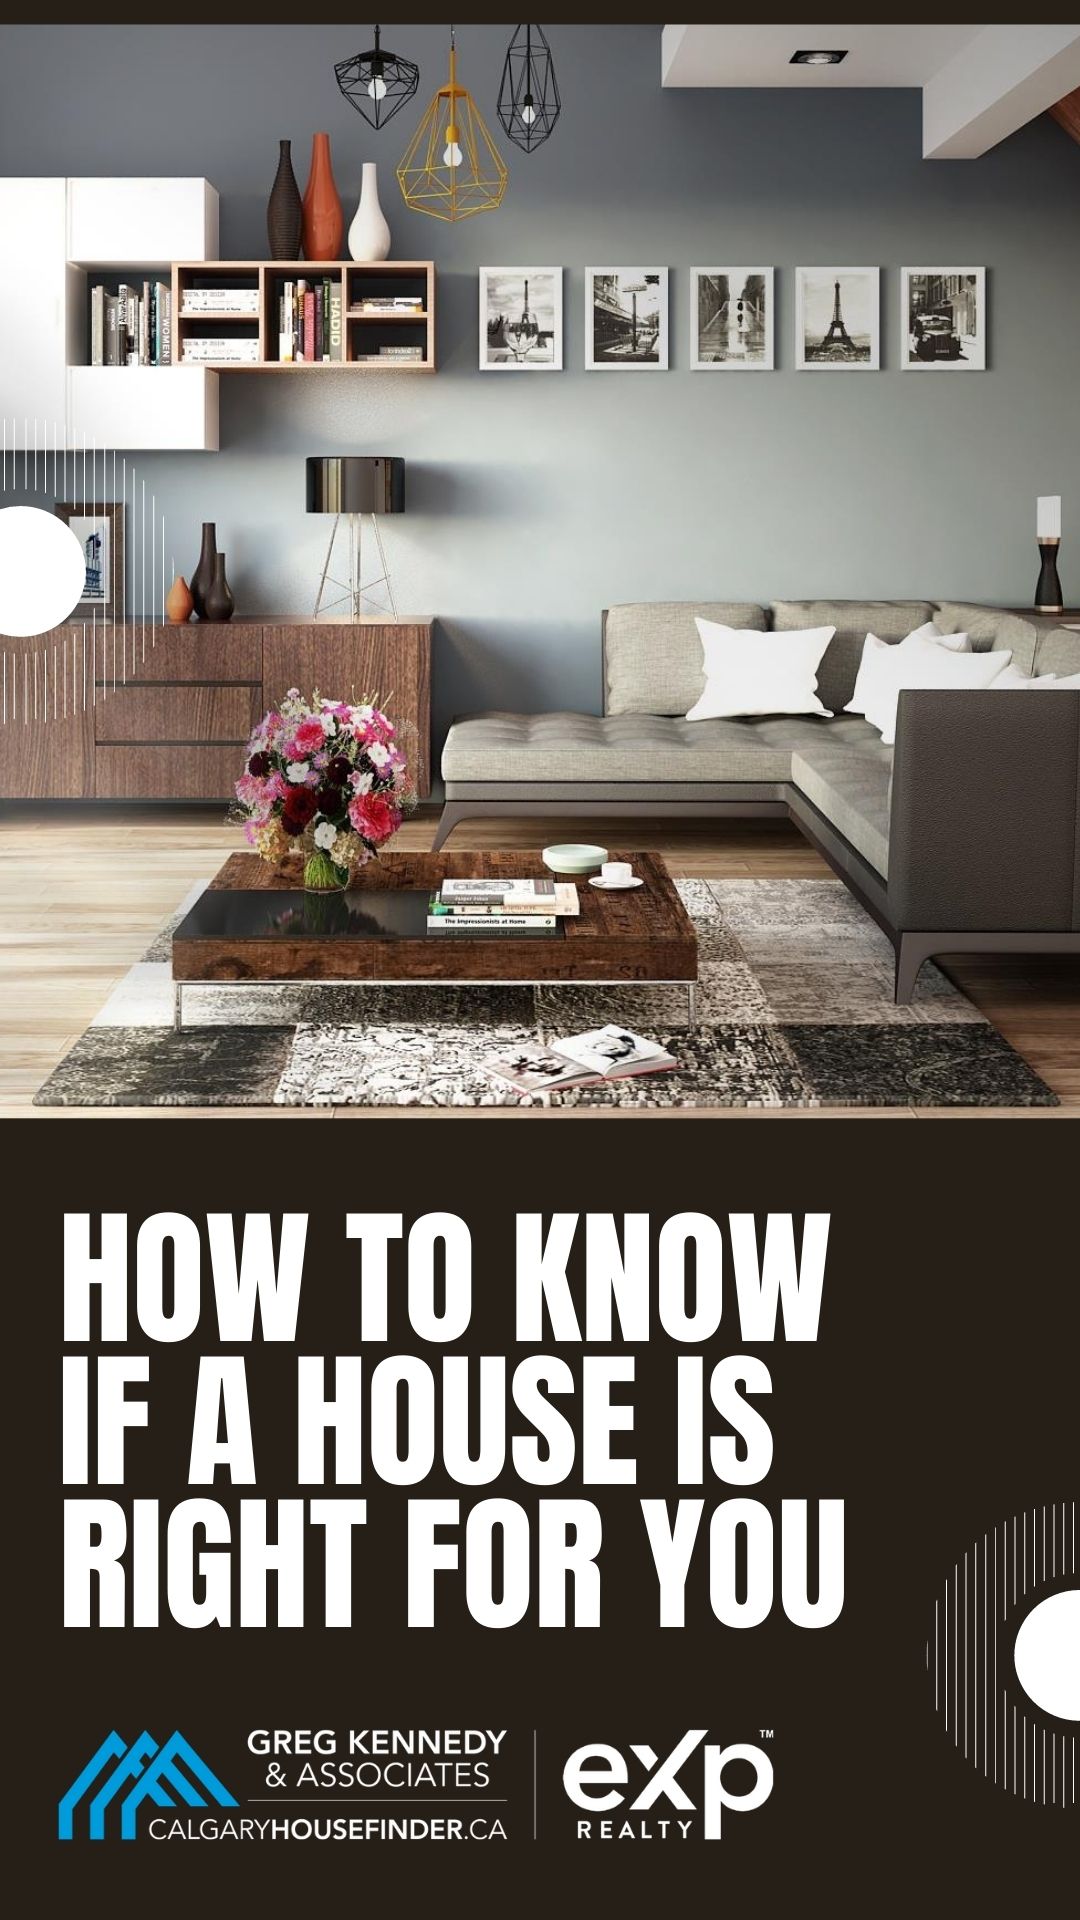 How to Know if a House is Right for You